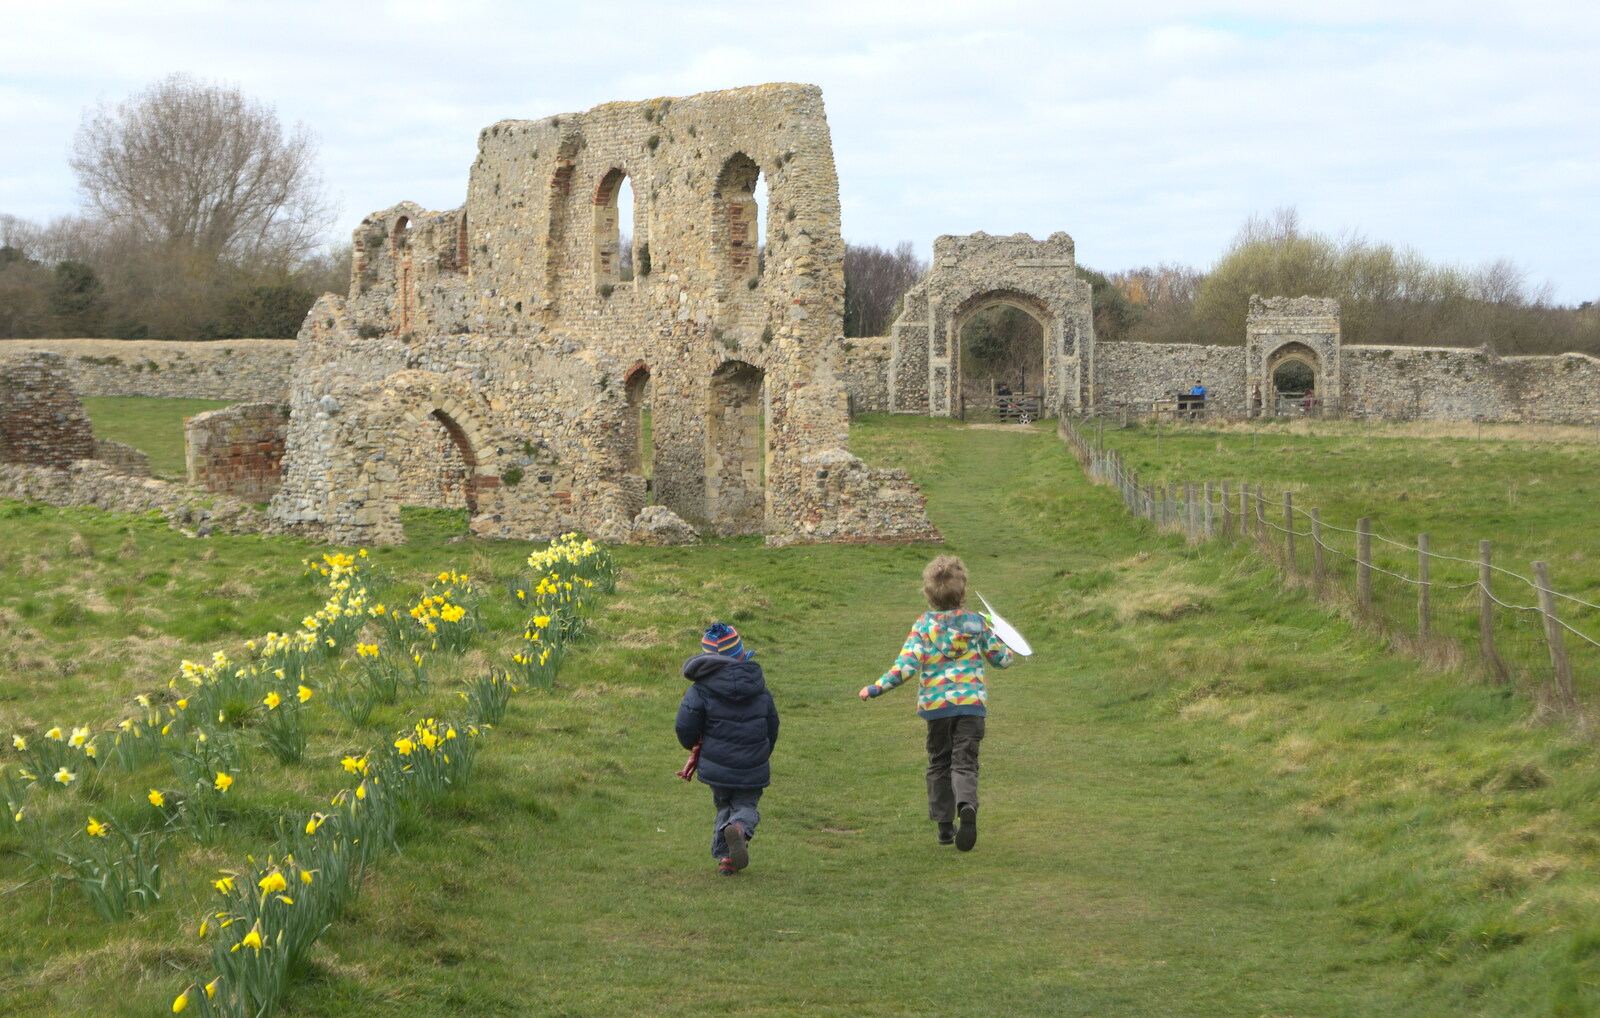 Harry and Fred run down to Dunwich Priory from A Day on the Beach, Dunwich, Suffolk - 6th April 2015